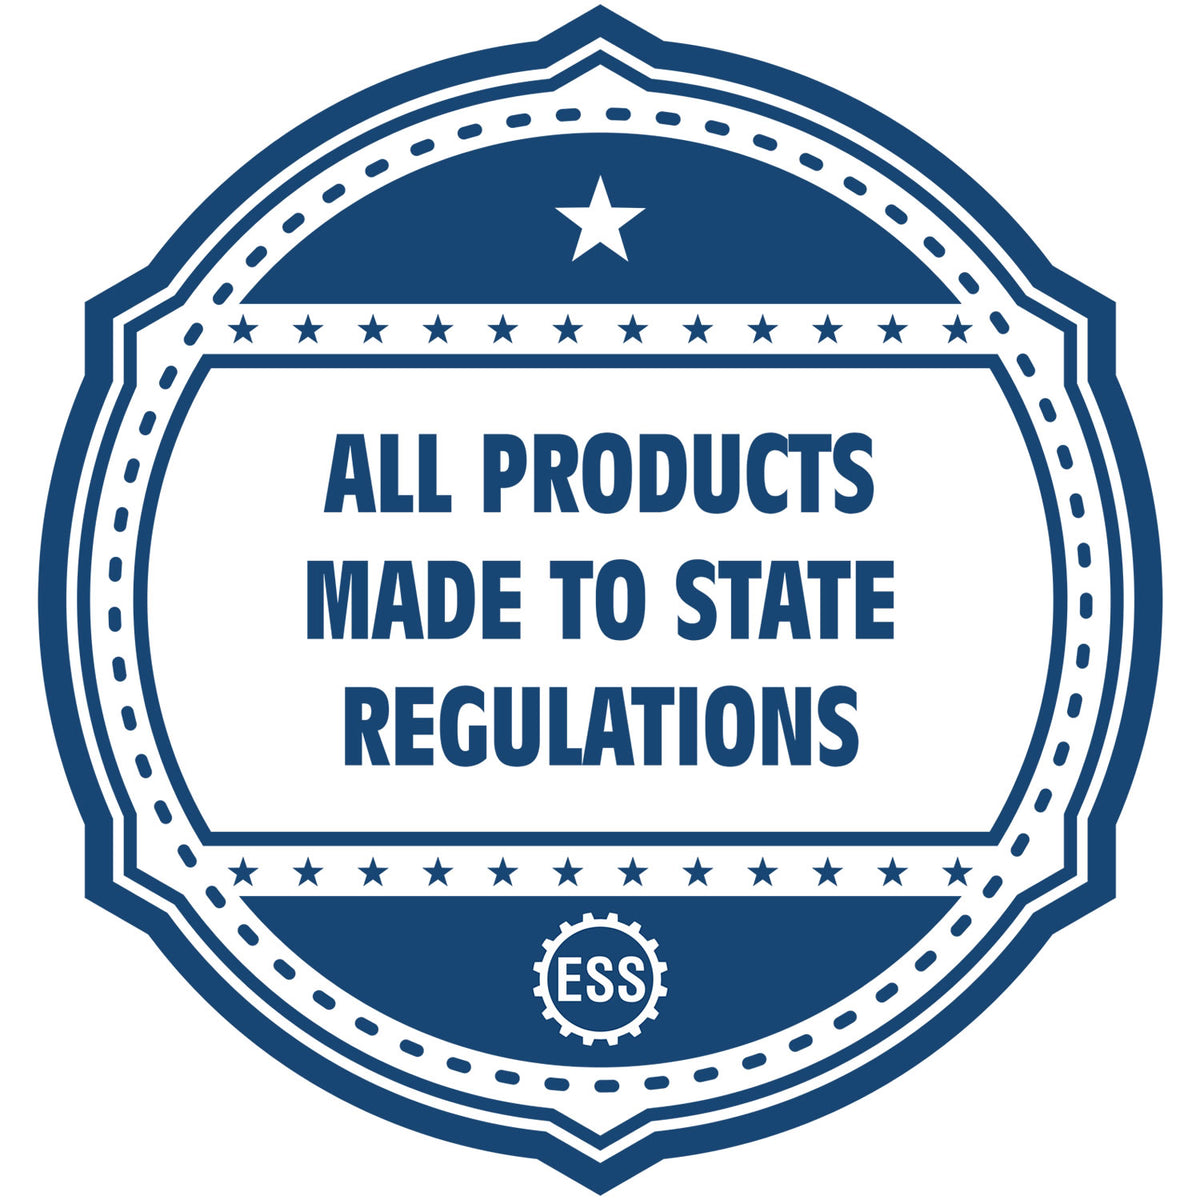 An icon or badge element for the Super Slim Wisconsin Notary Public Stamp showing that this product is made in compliance with state regulations.